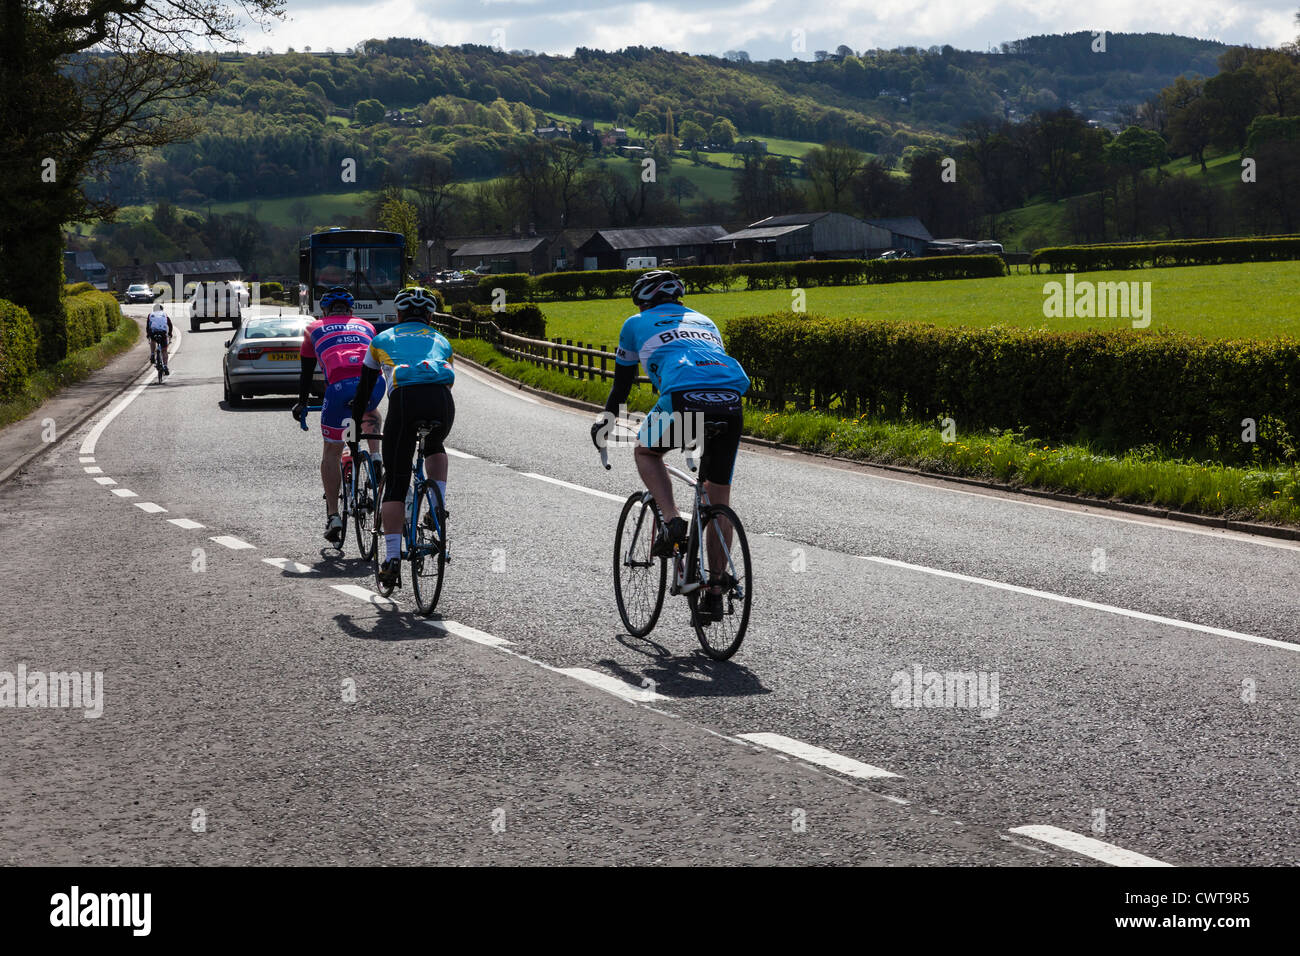 Cyclists on the busy A6 road through the Derbyshire Dales near Stanton in Peak, UK Stock Photo